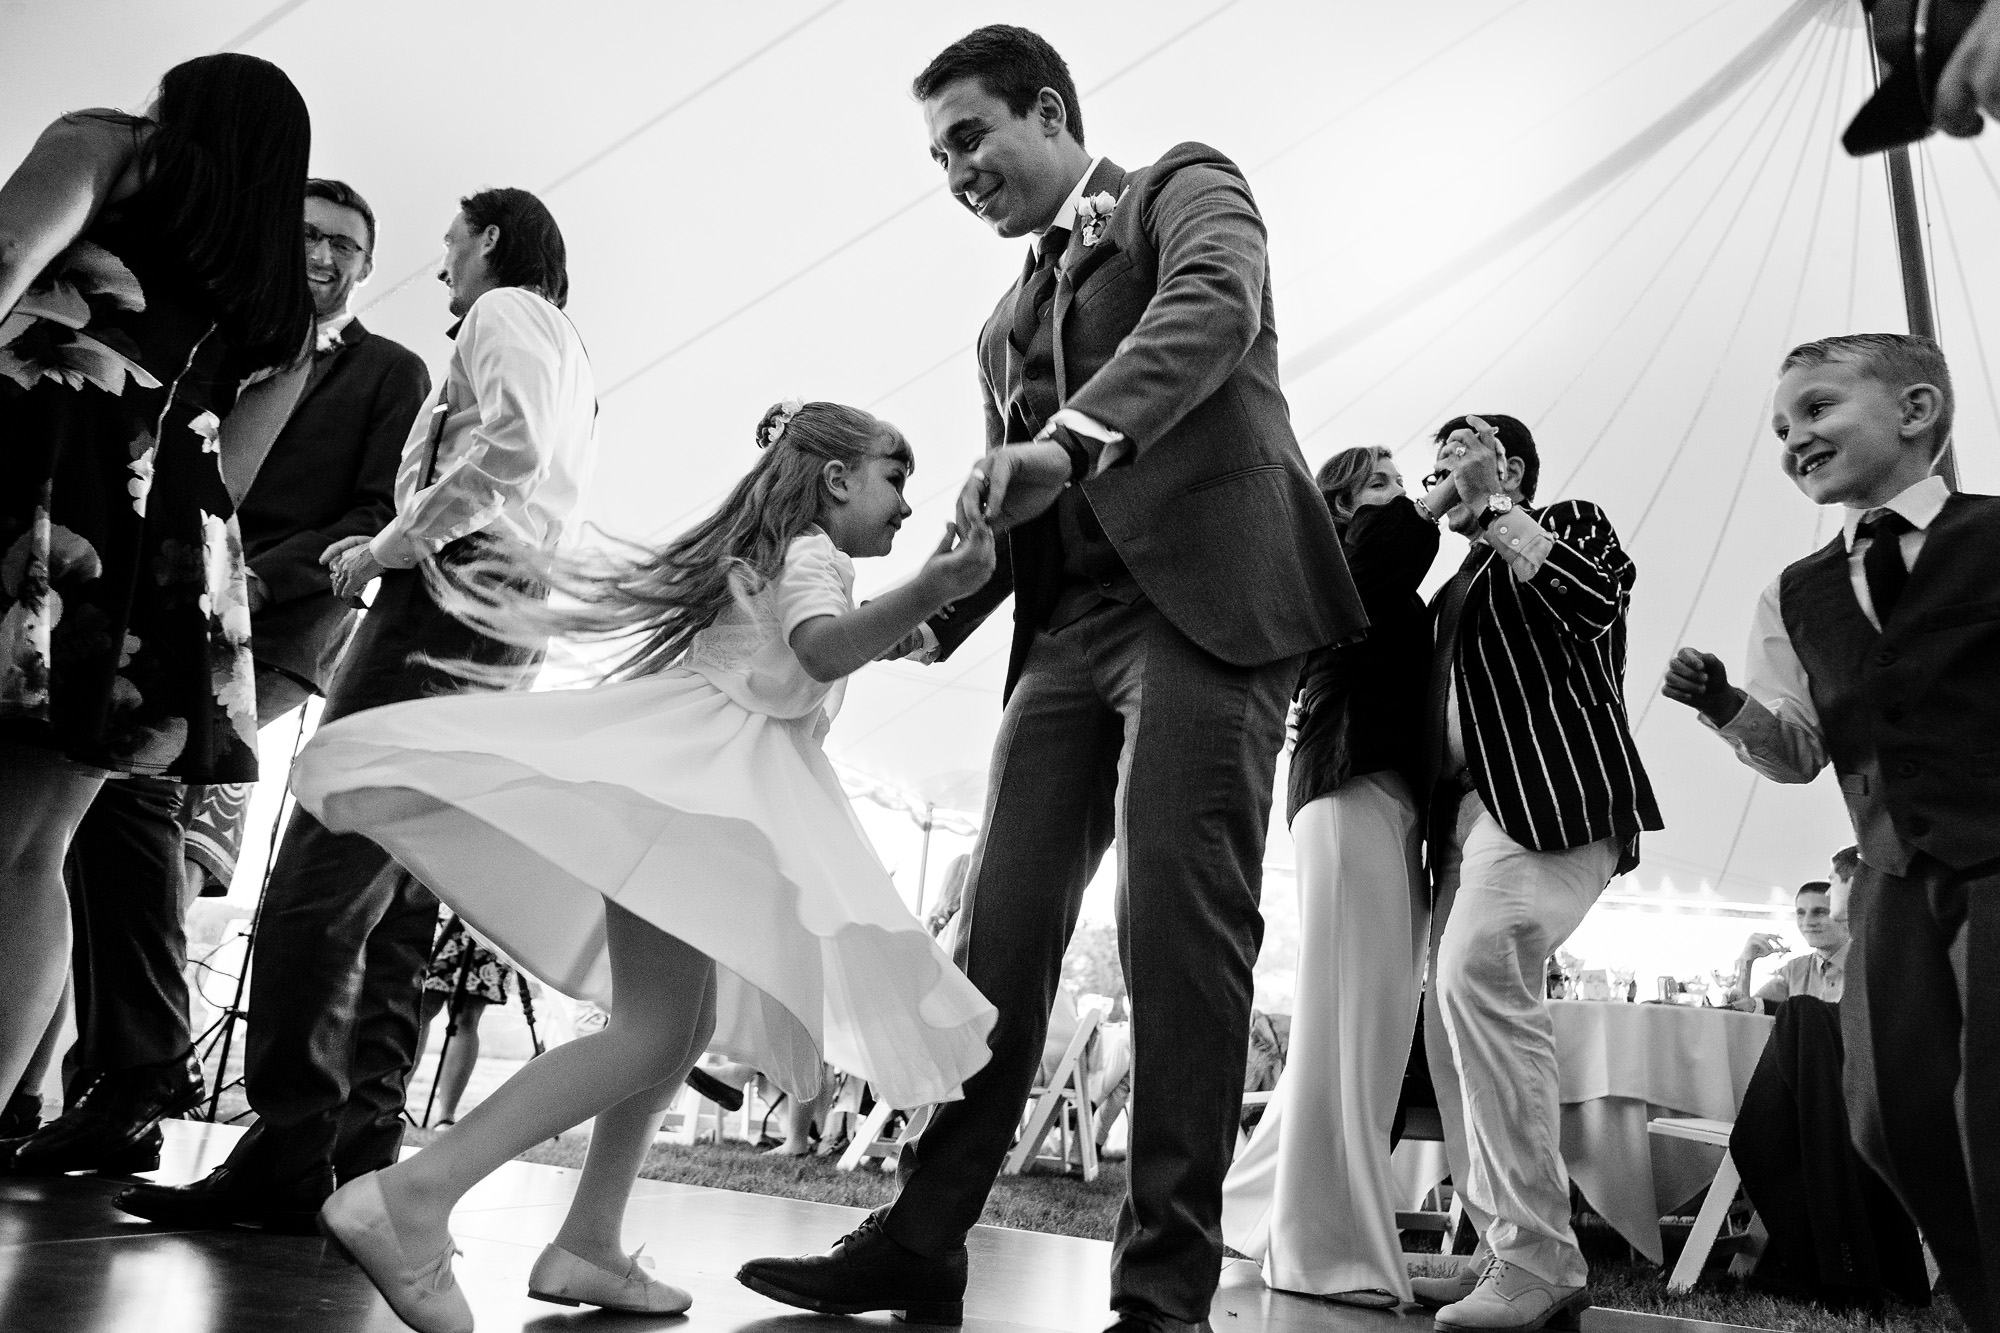 The groom dances with the flower girl.